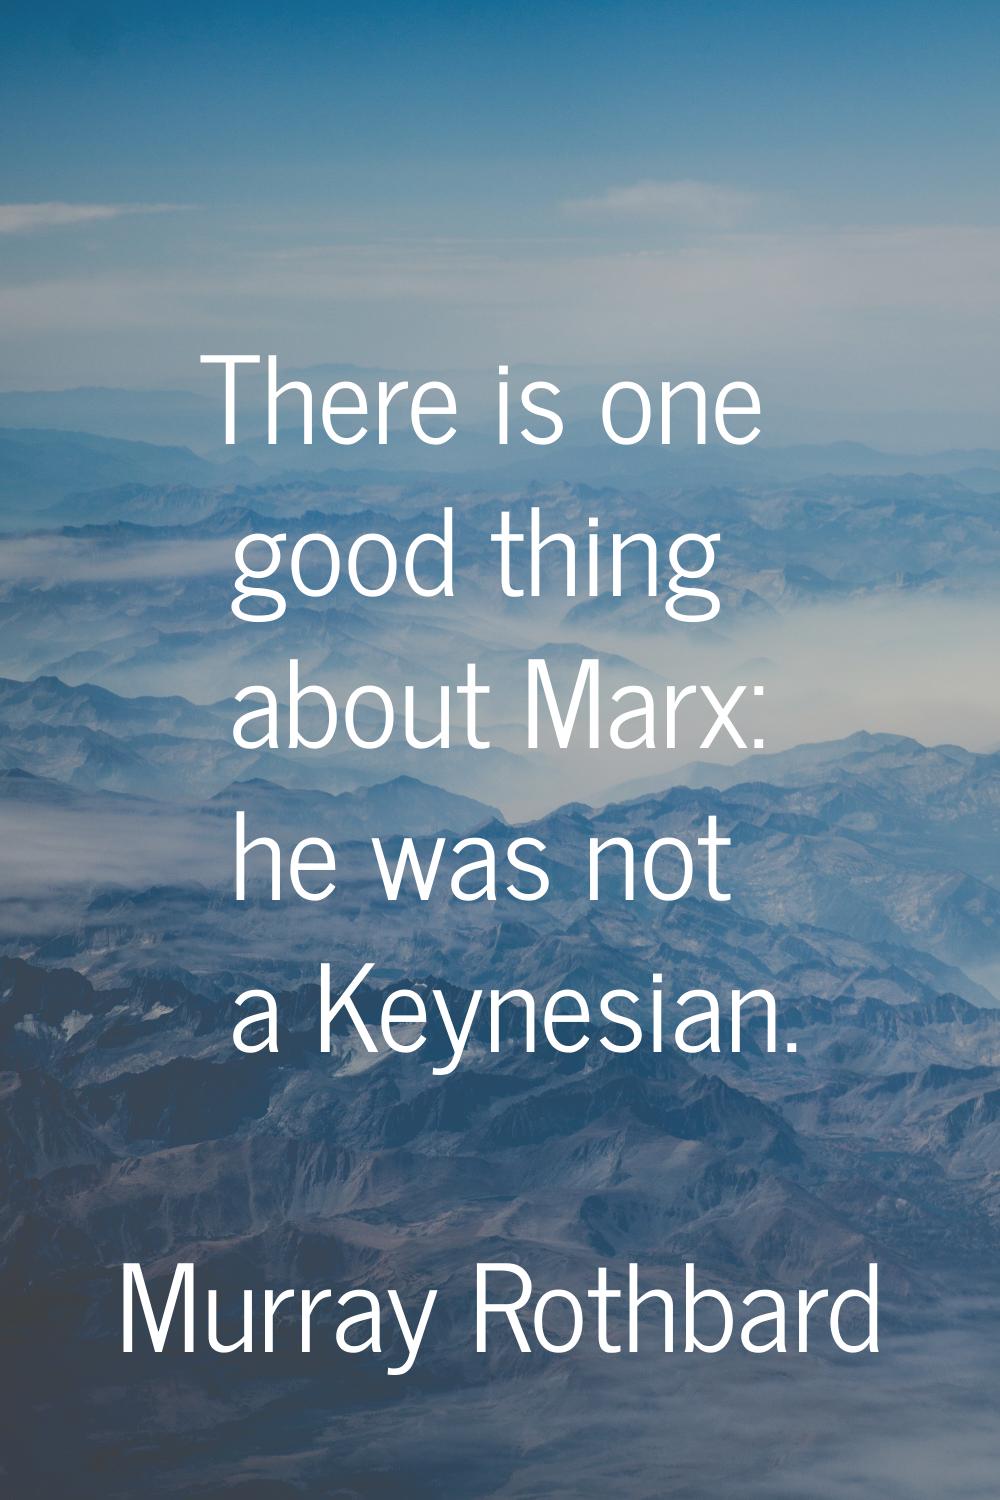 There is one good thing about Marx: he was not a Keynesian.